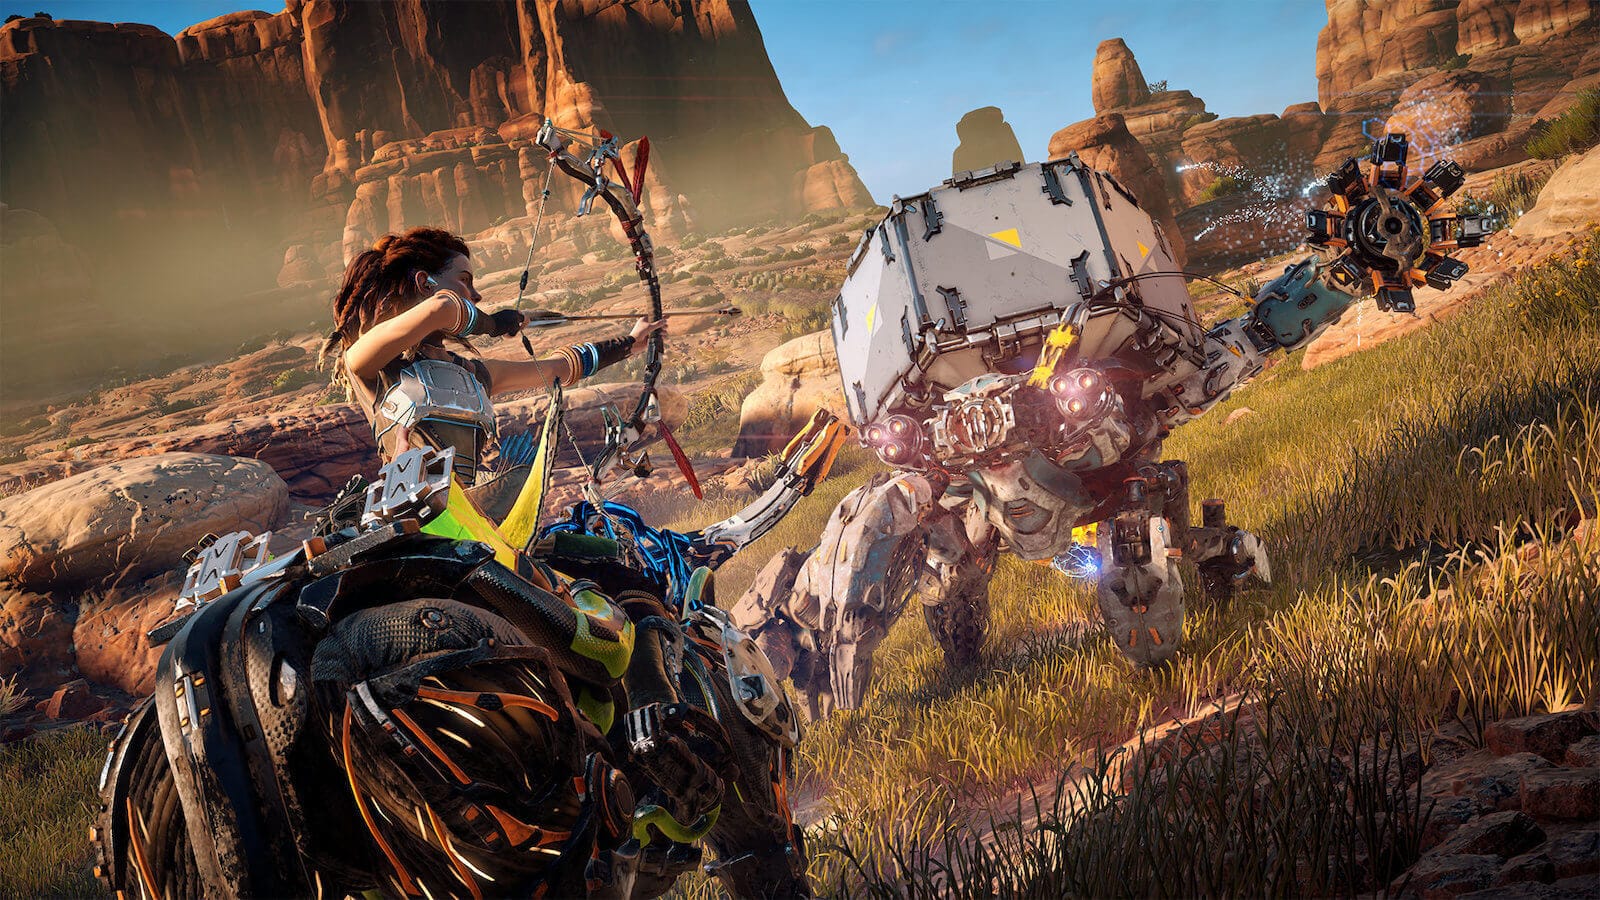 Horizon Zero Dawn is The Best Selling Game on Steam